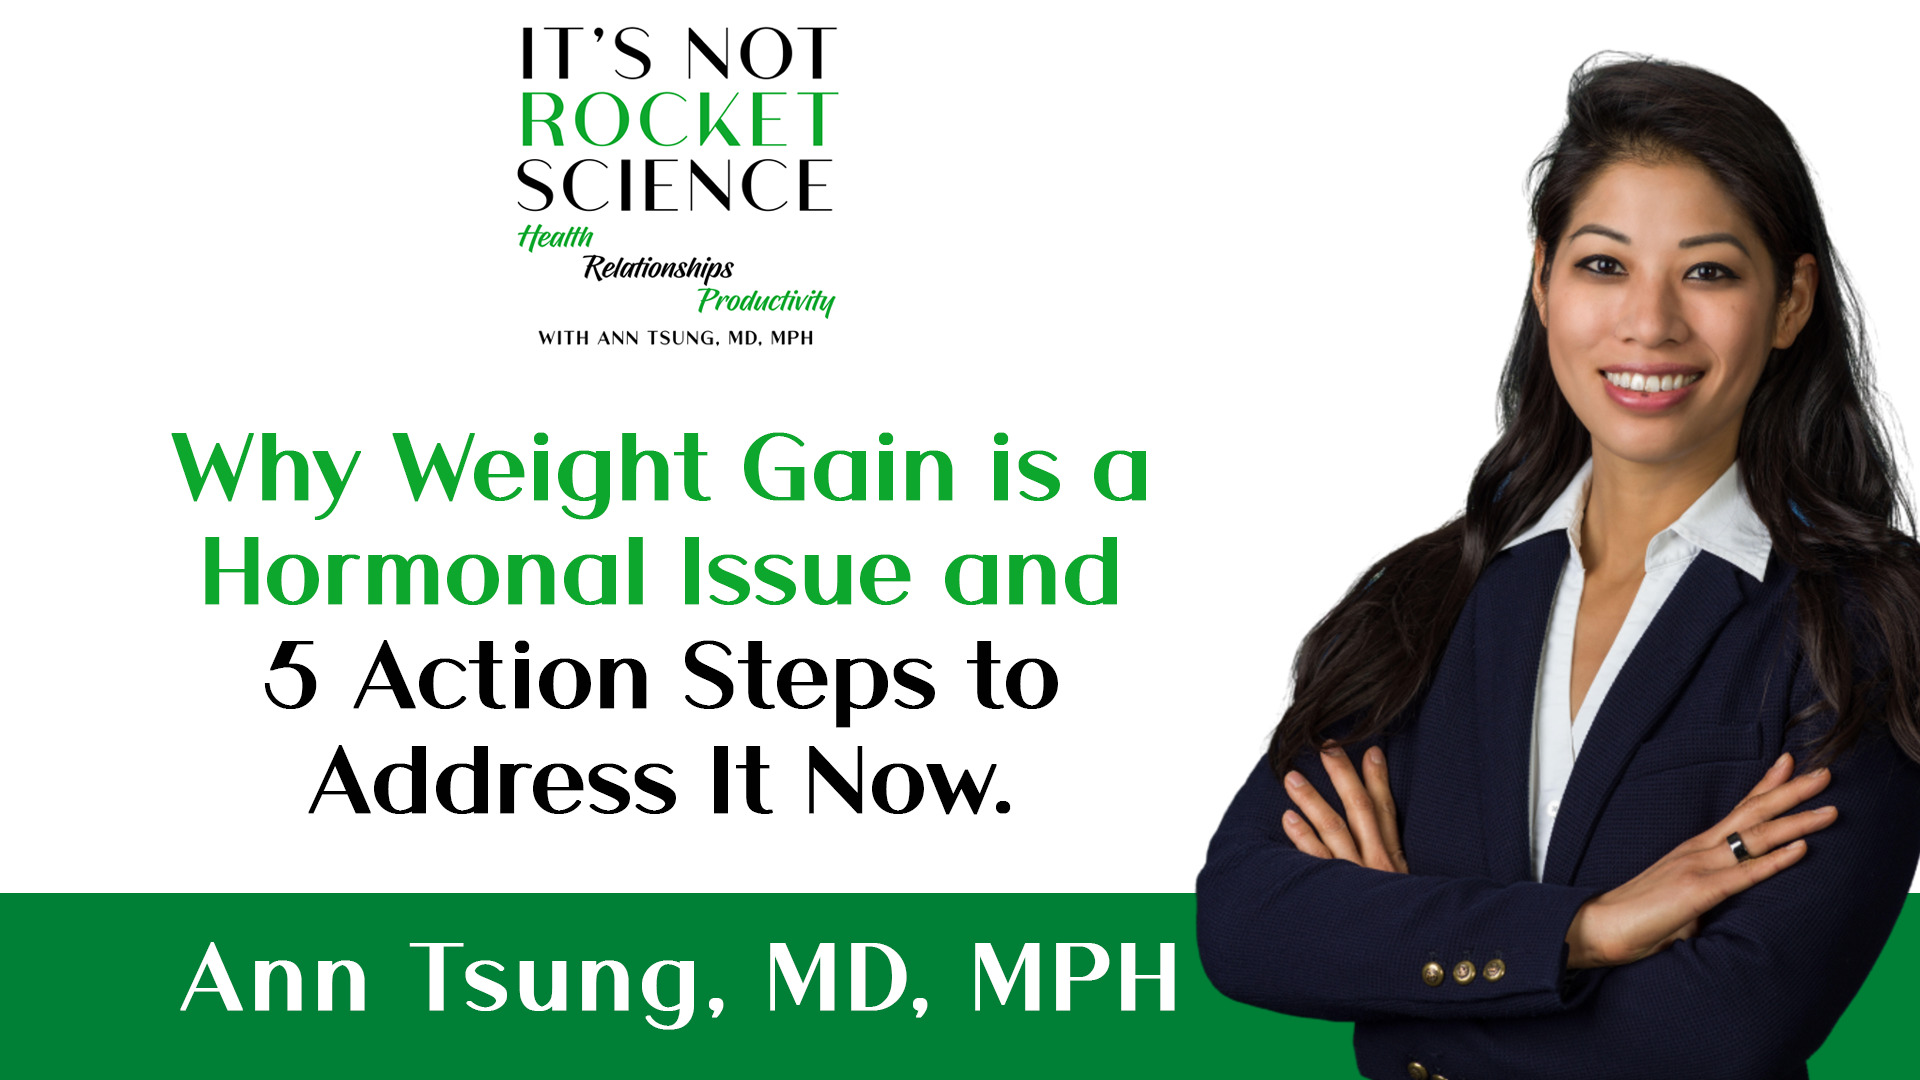 045. Why Weight Gain is a Hormonal Issue and 5 Action Steps to Address It Now. Insulin, Cortisol, Time Restricted Eating, Fiber, Vinegar, Protein, and Healthy Fats